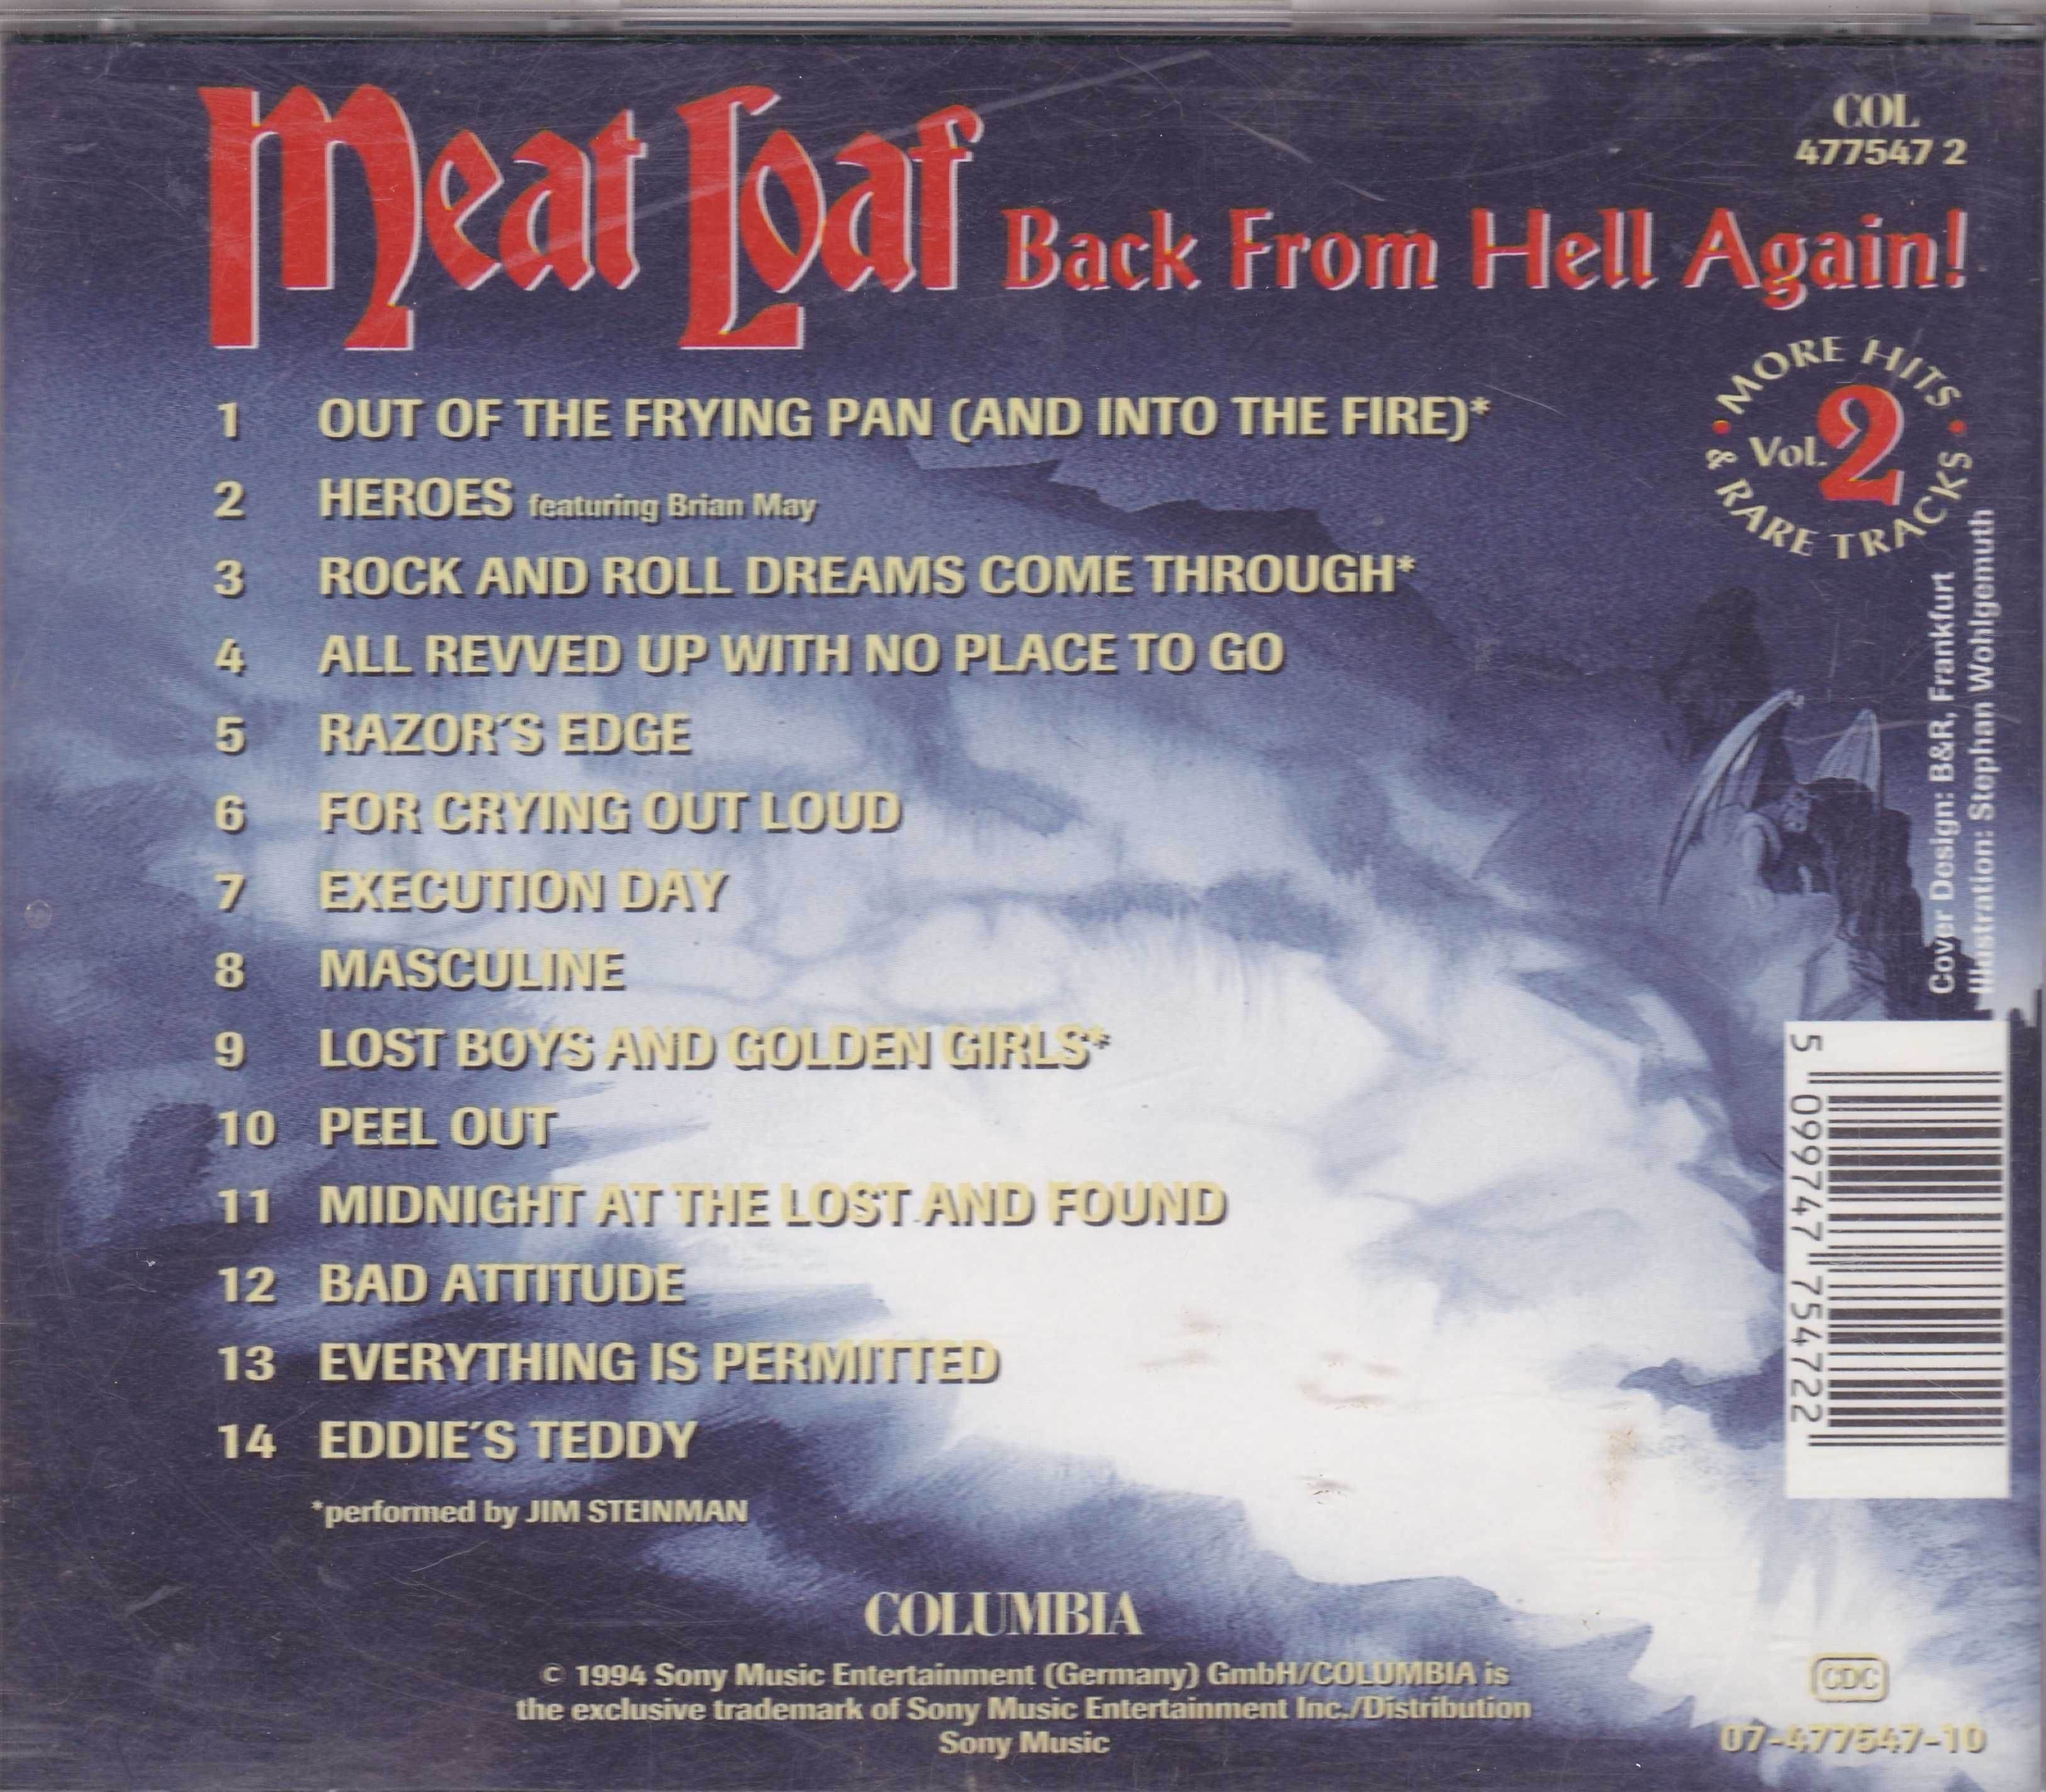 Meat Loaf – Back From Hell Again! The Very Best Of Vol.2